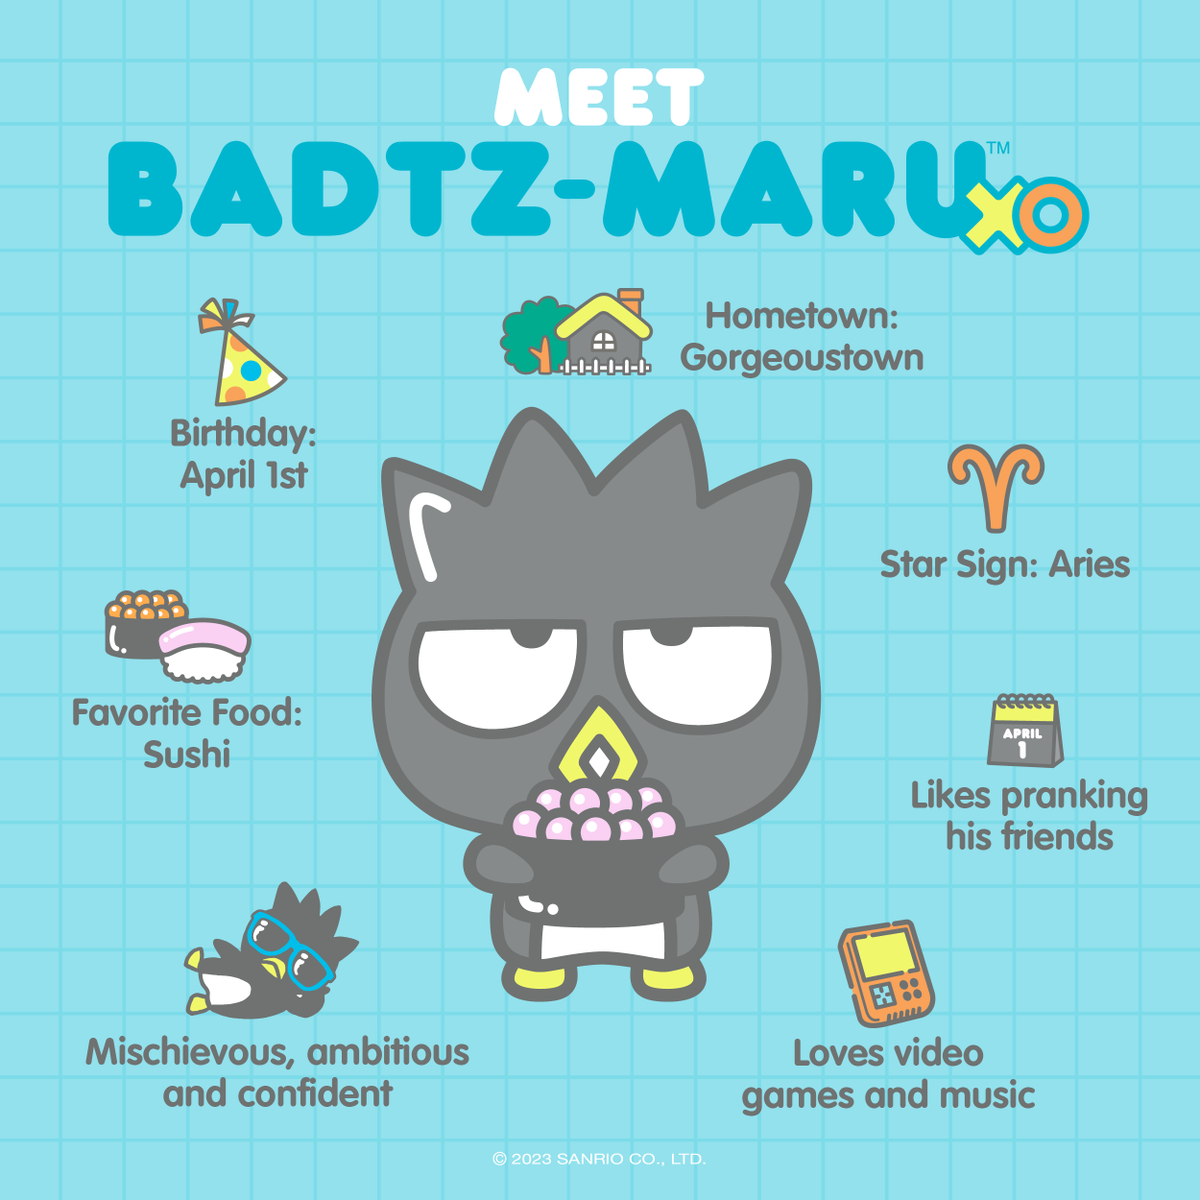 Badtz-maru is our Friend of the Month for June 🖤 Here are some fun facts about our mischievous friend! #SanrioFOTM